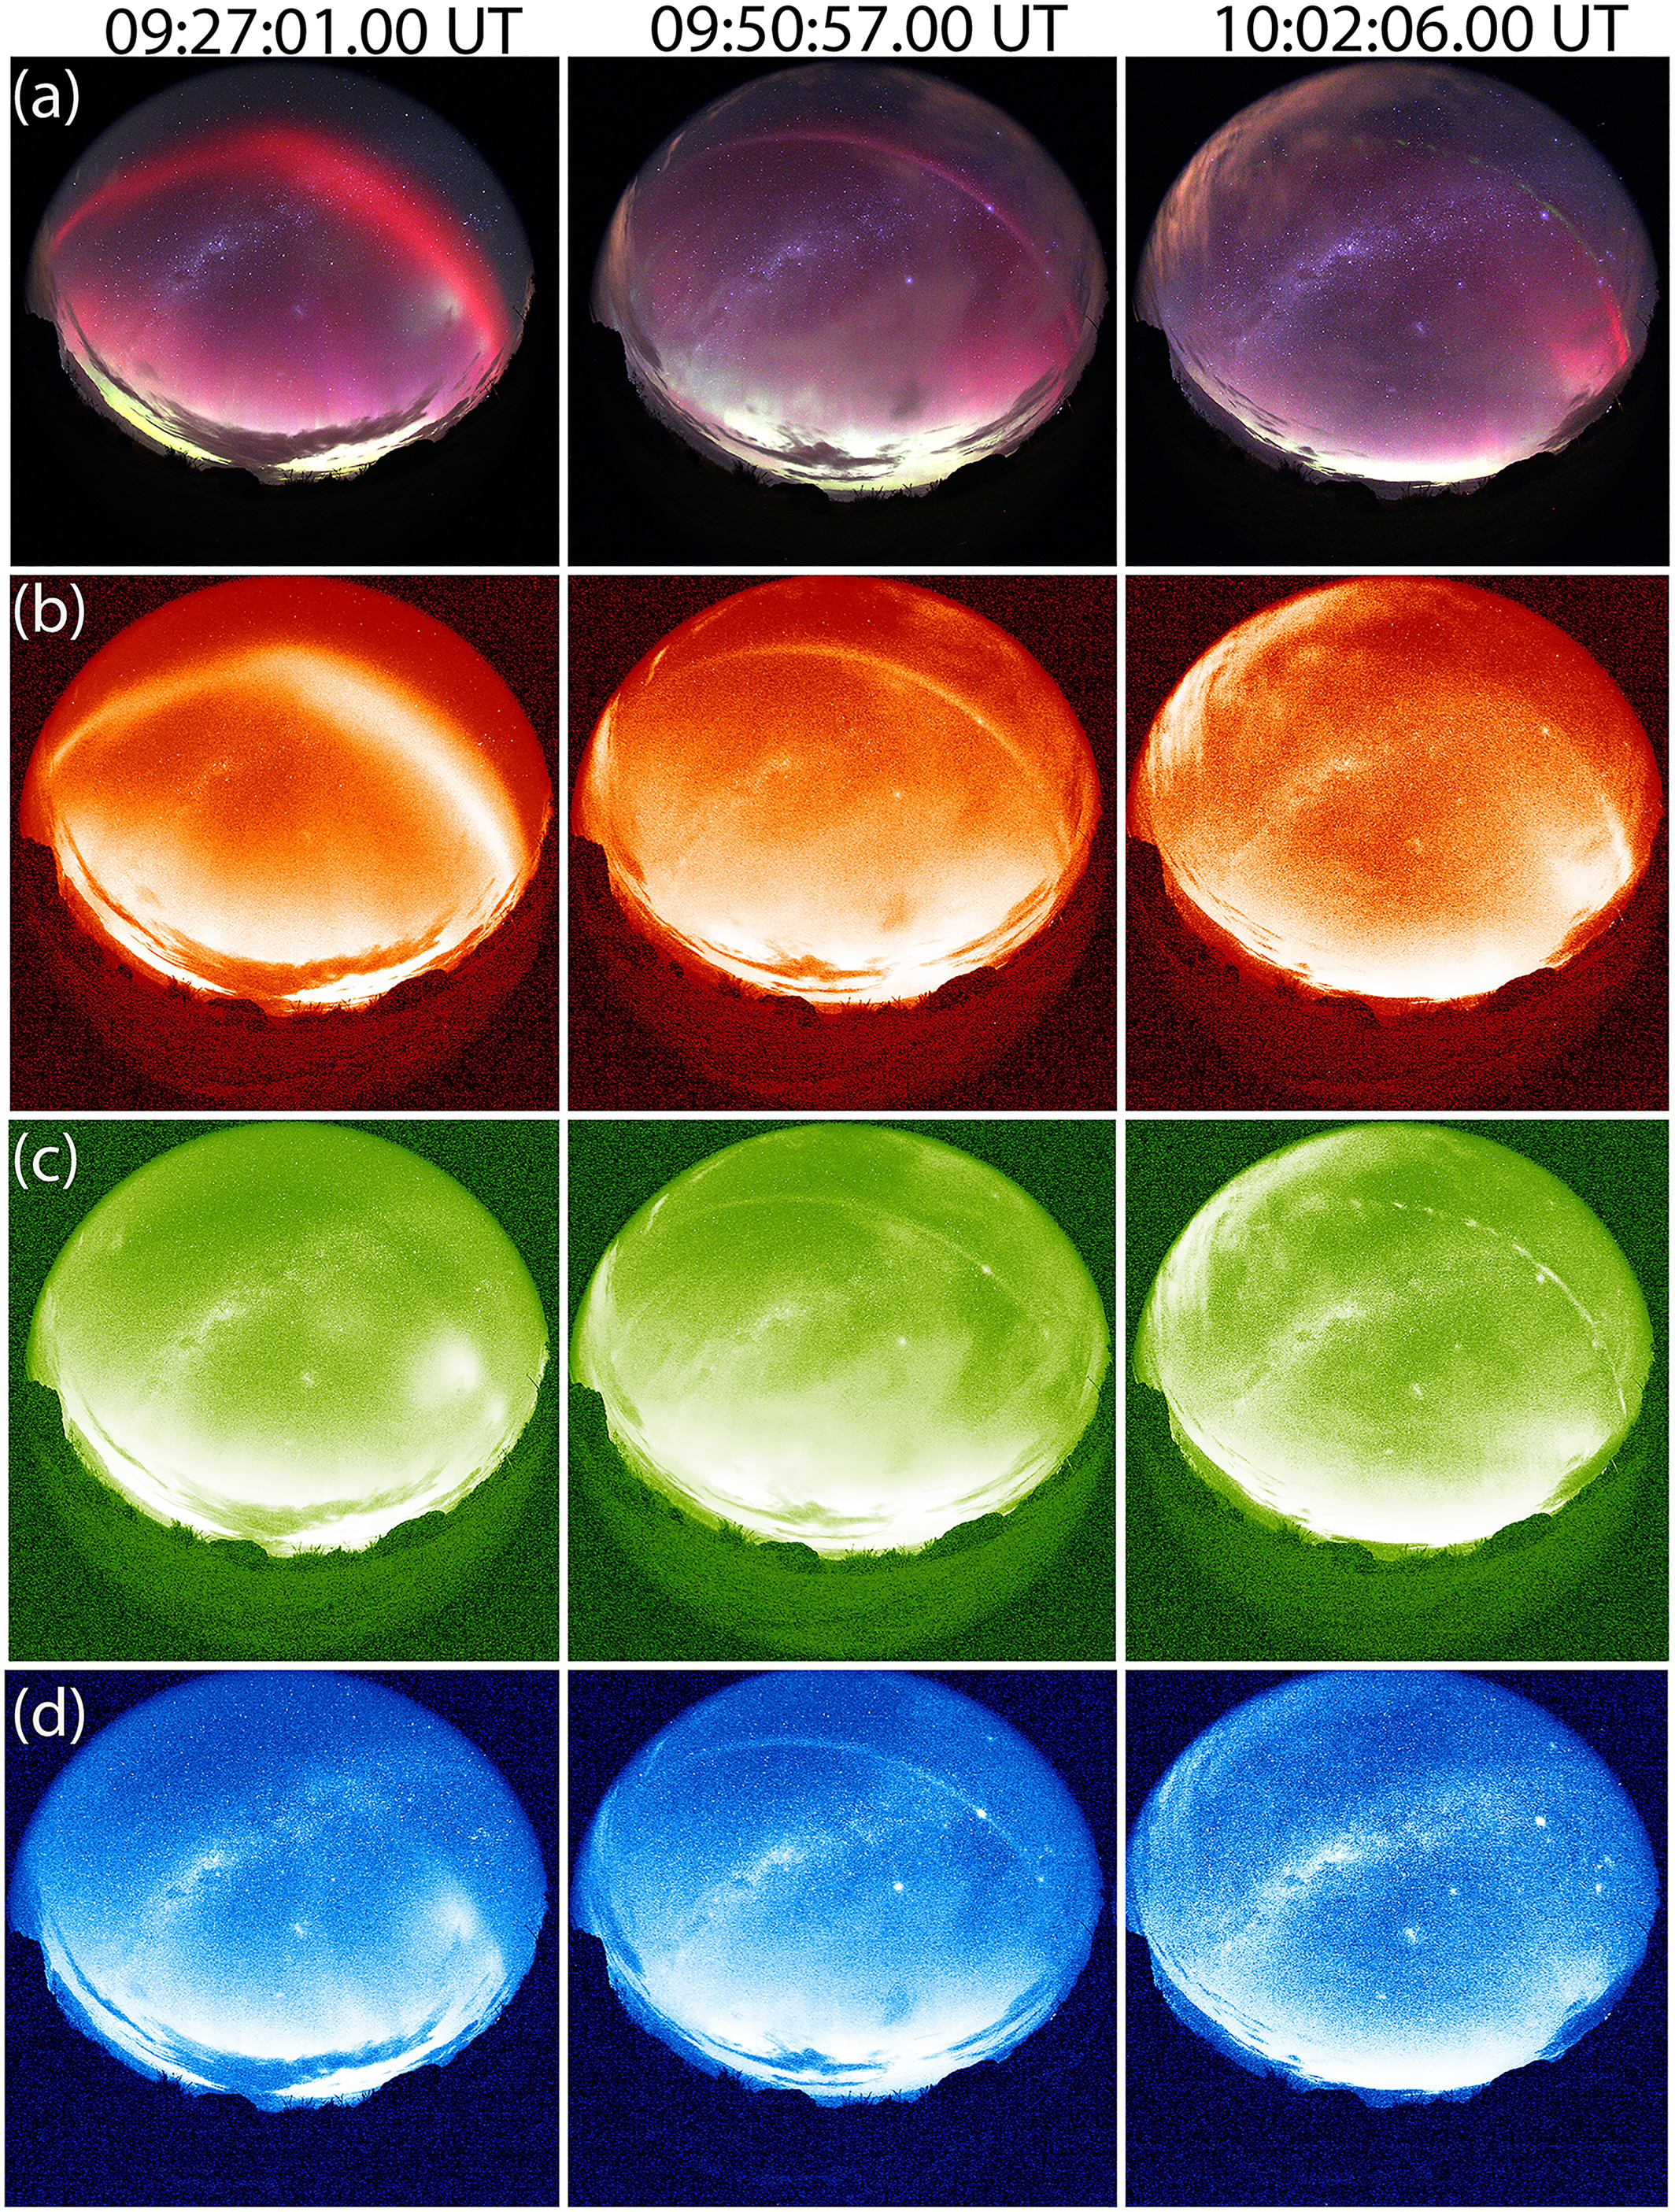 The full set of aurora images showing aurora objects through a variety of color filters.